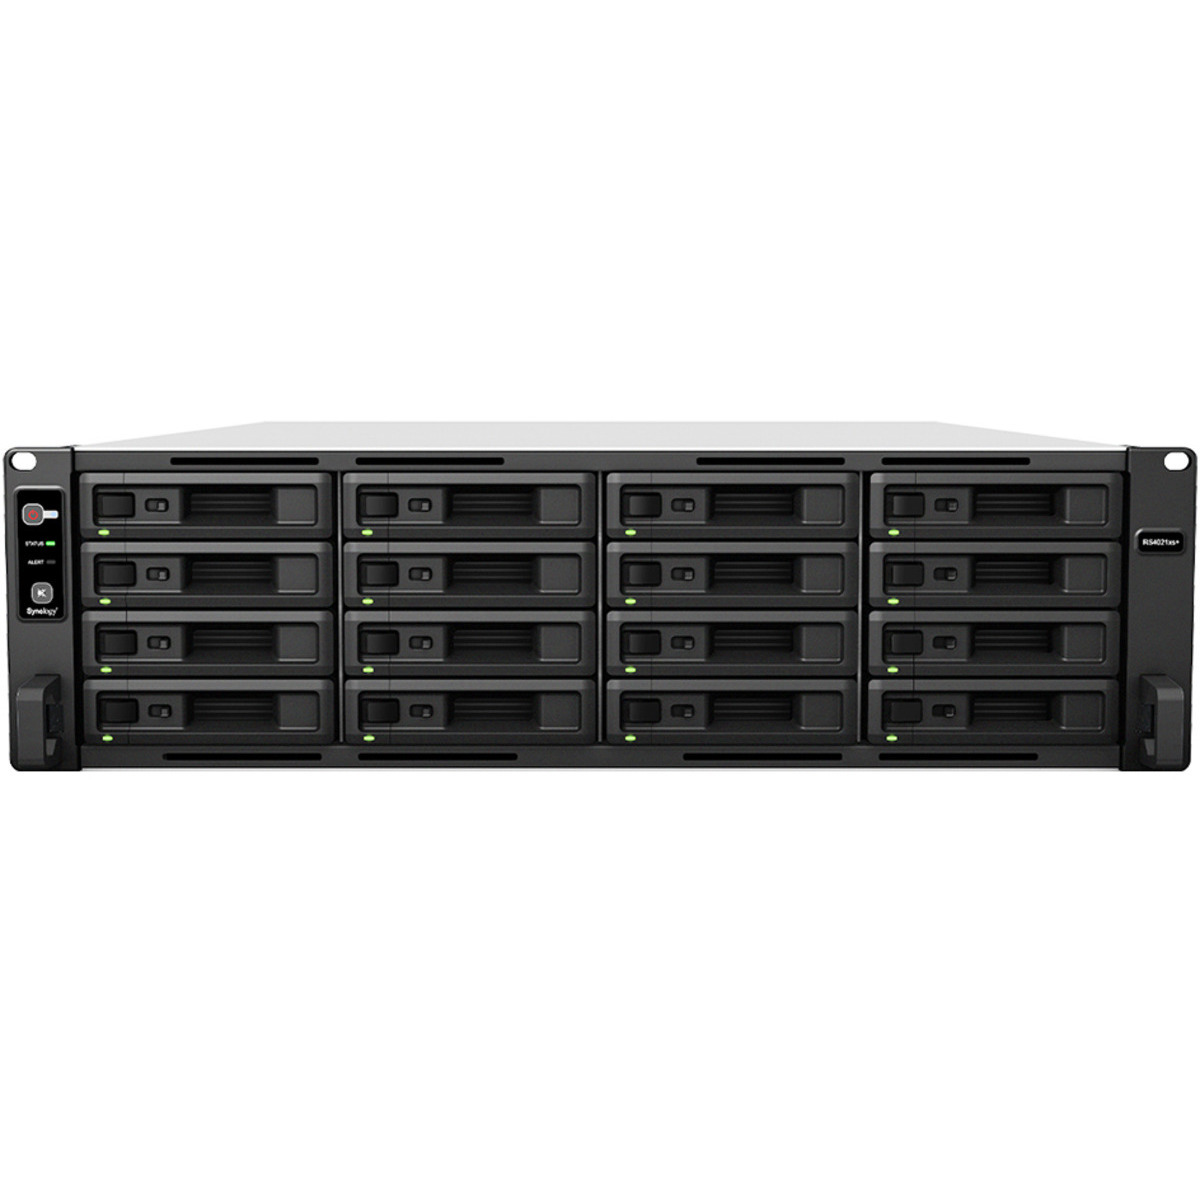 Synology RackStation RS4021xs+ 44tb 16-Bay RackMount Large Business / Enterprise NAS - Network Attached Storage Device 11x4tb Synology HAT5300 Series HAT5300-4T 3.5 7200rpm SATA 6Gb/s HDD ENTERPRISE Class Drives Installed - Burn-In Tested RackStation RS4021xs+